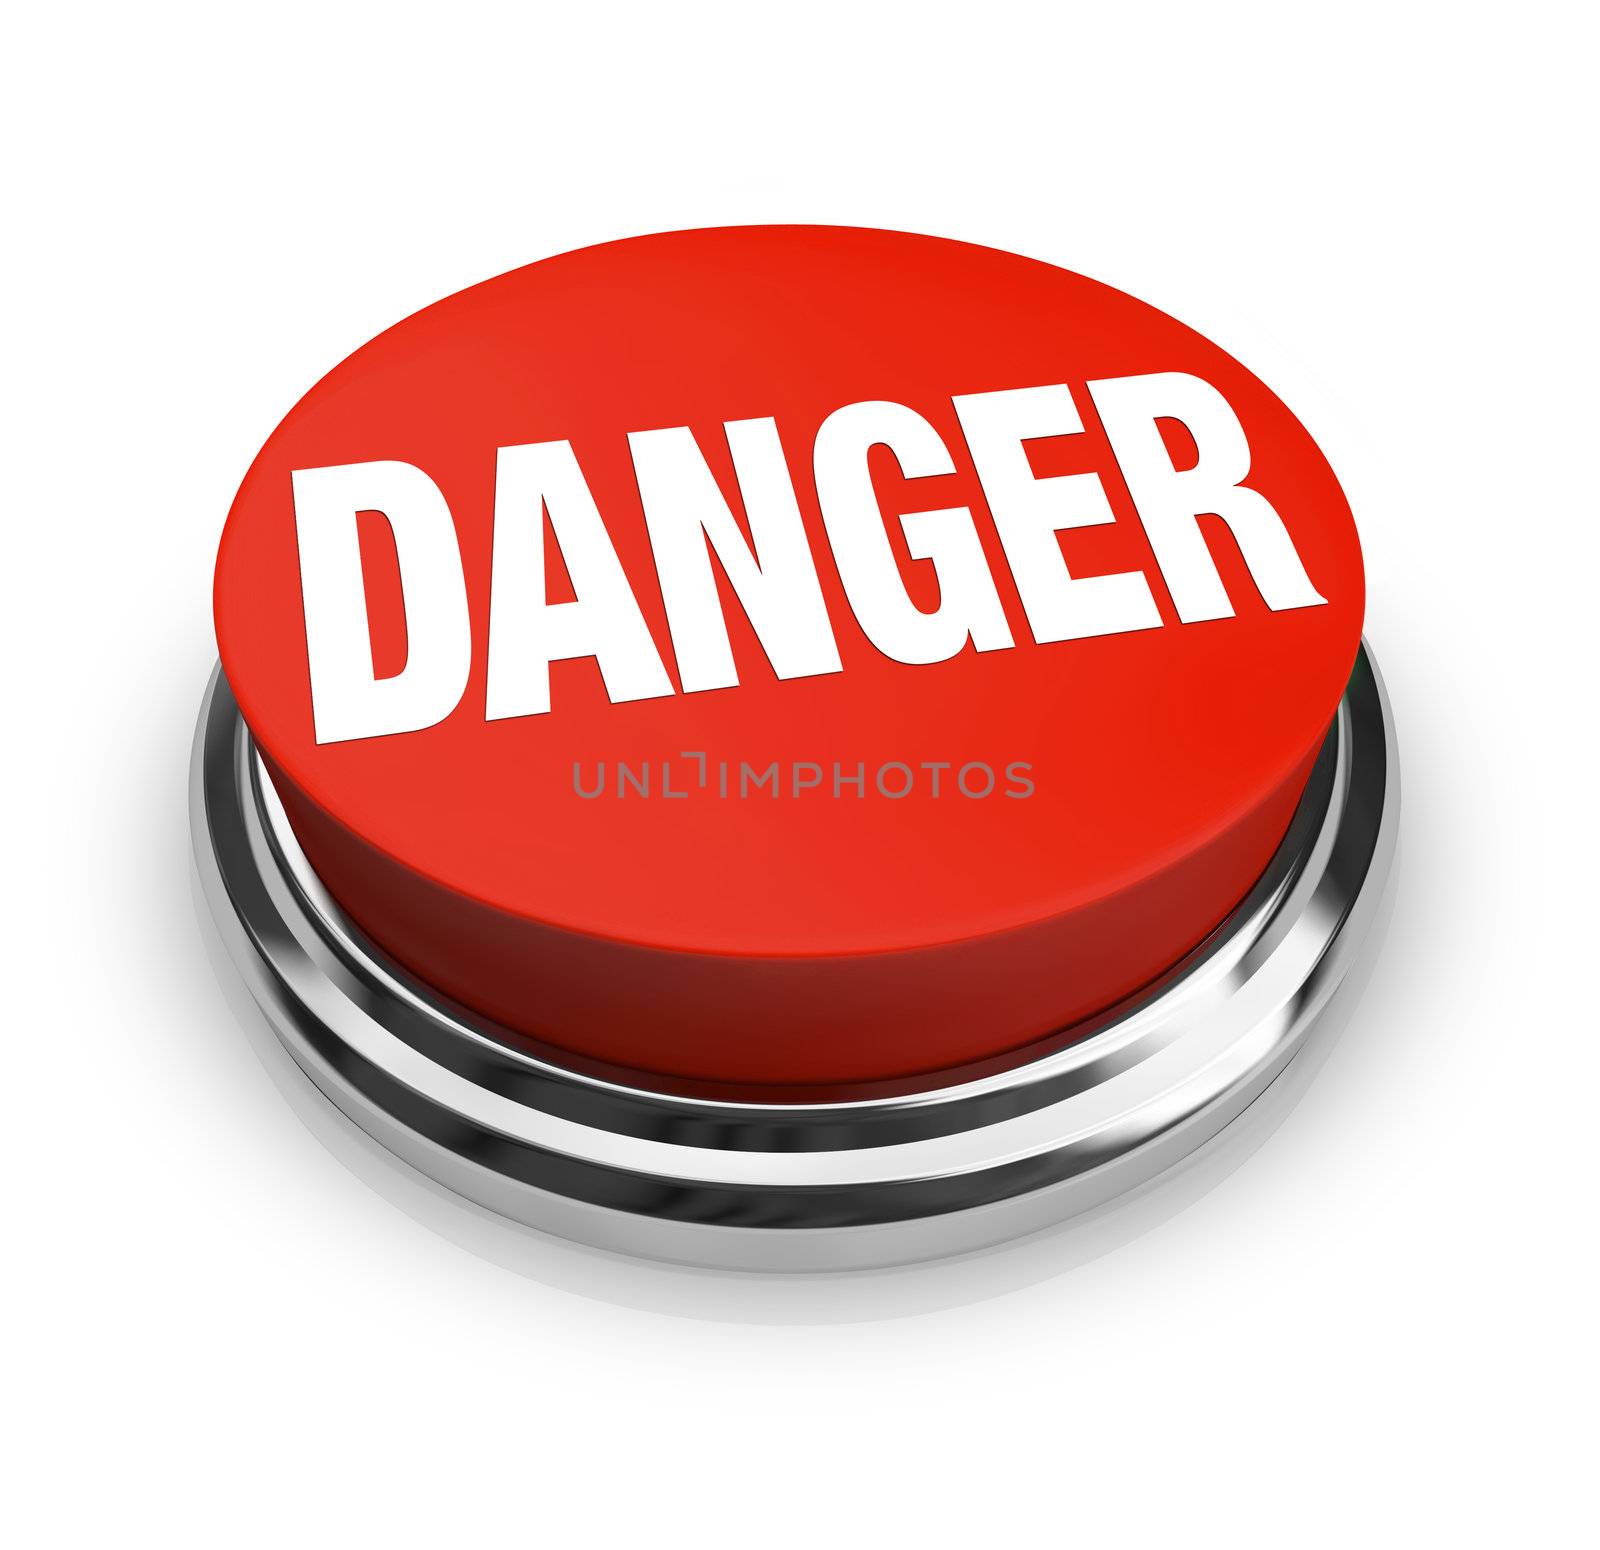 Danger Word on Round Red Button - Use Caution Be Alert by iQoncept